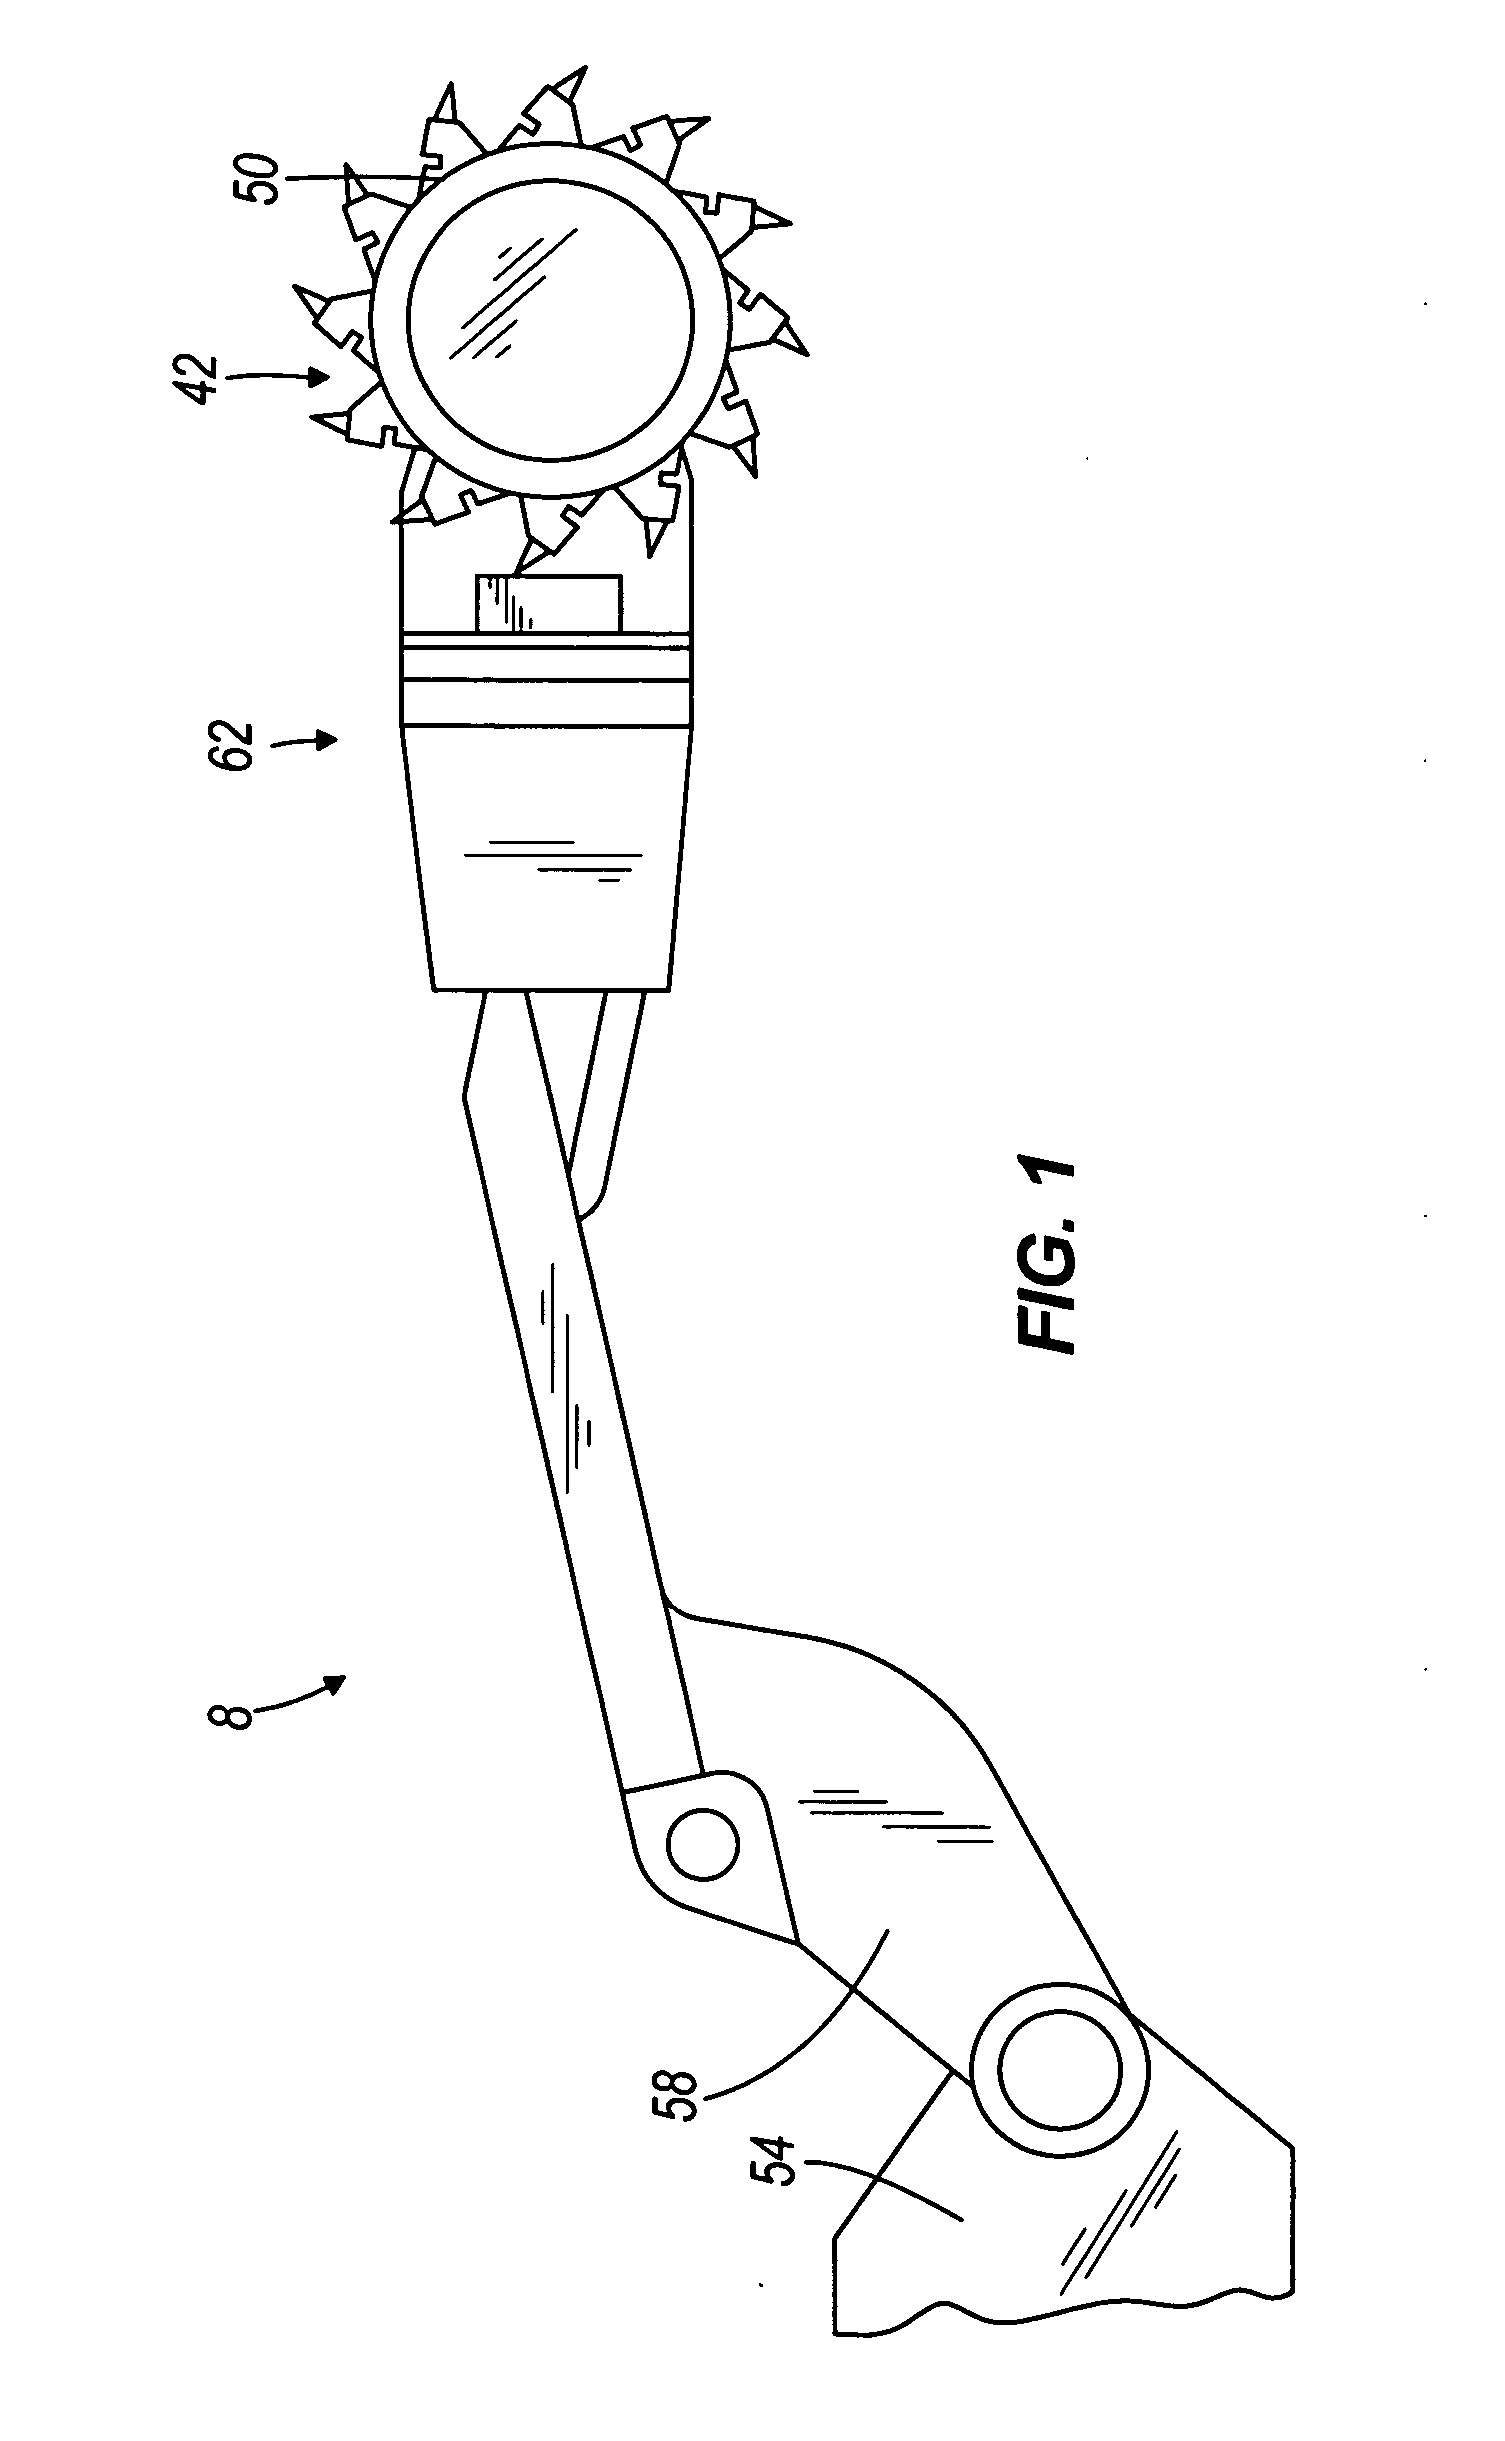 Drum turning mechanism for continuous miners and longwall shearers